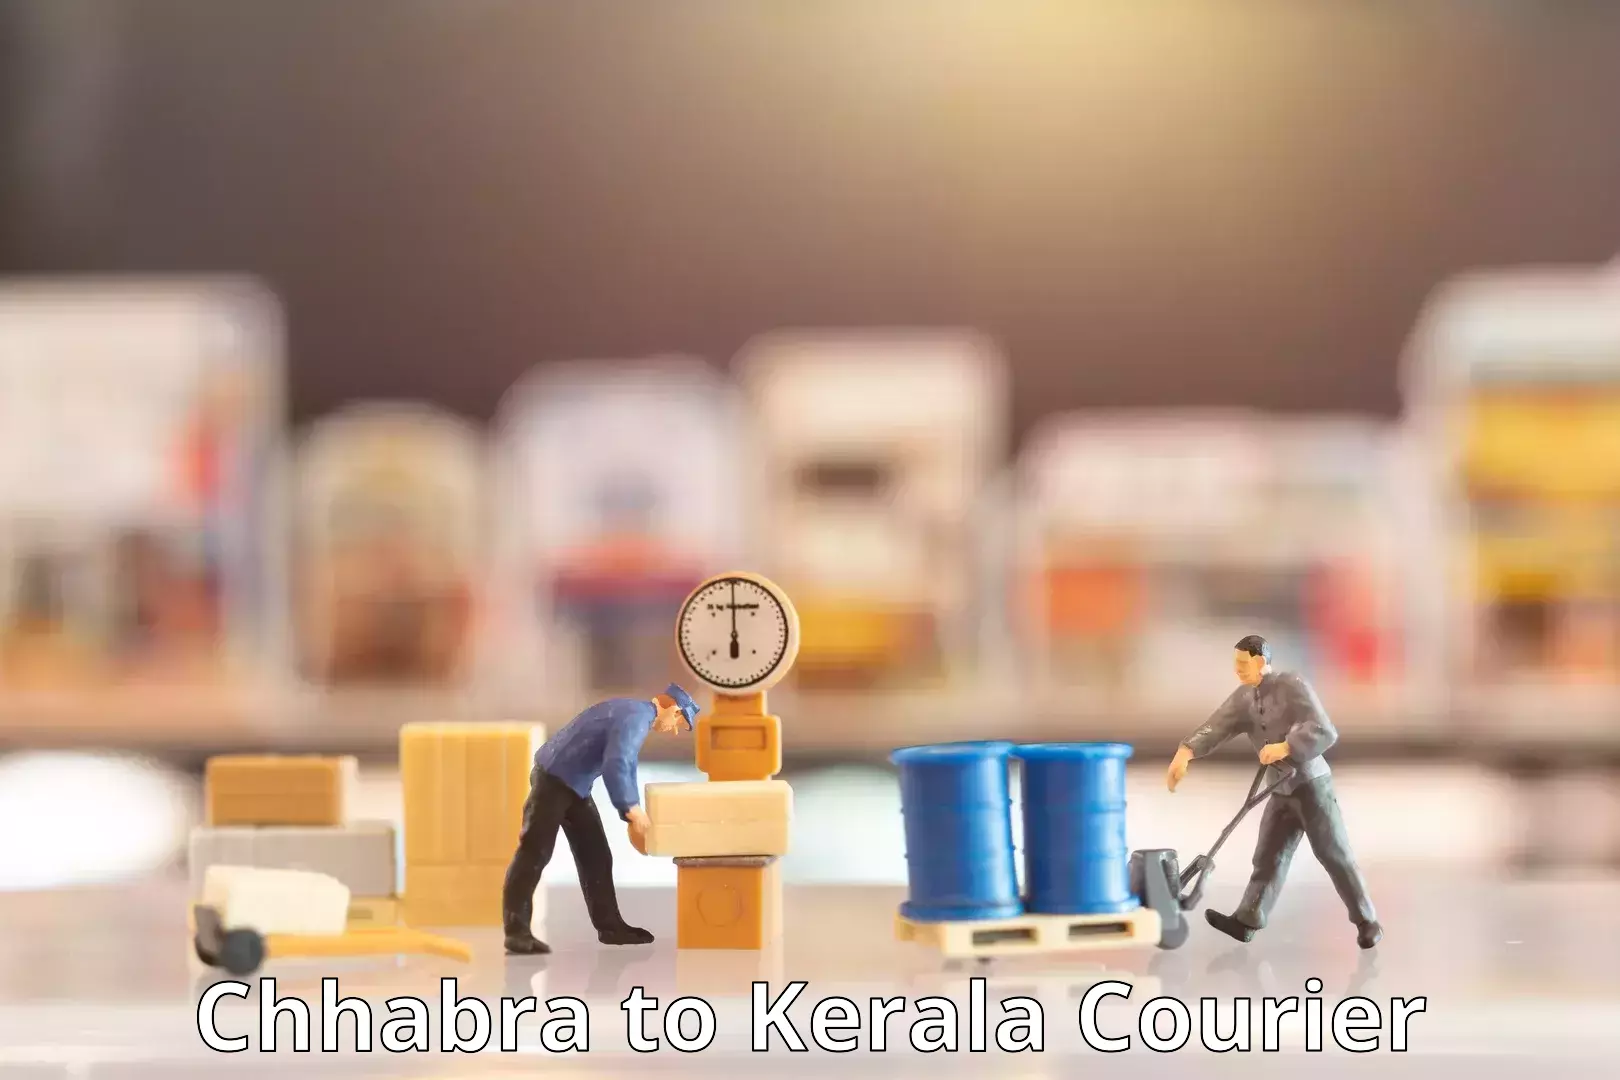 Parcel handling and care in Chhabra to Kerala